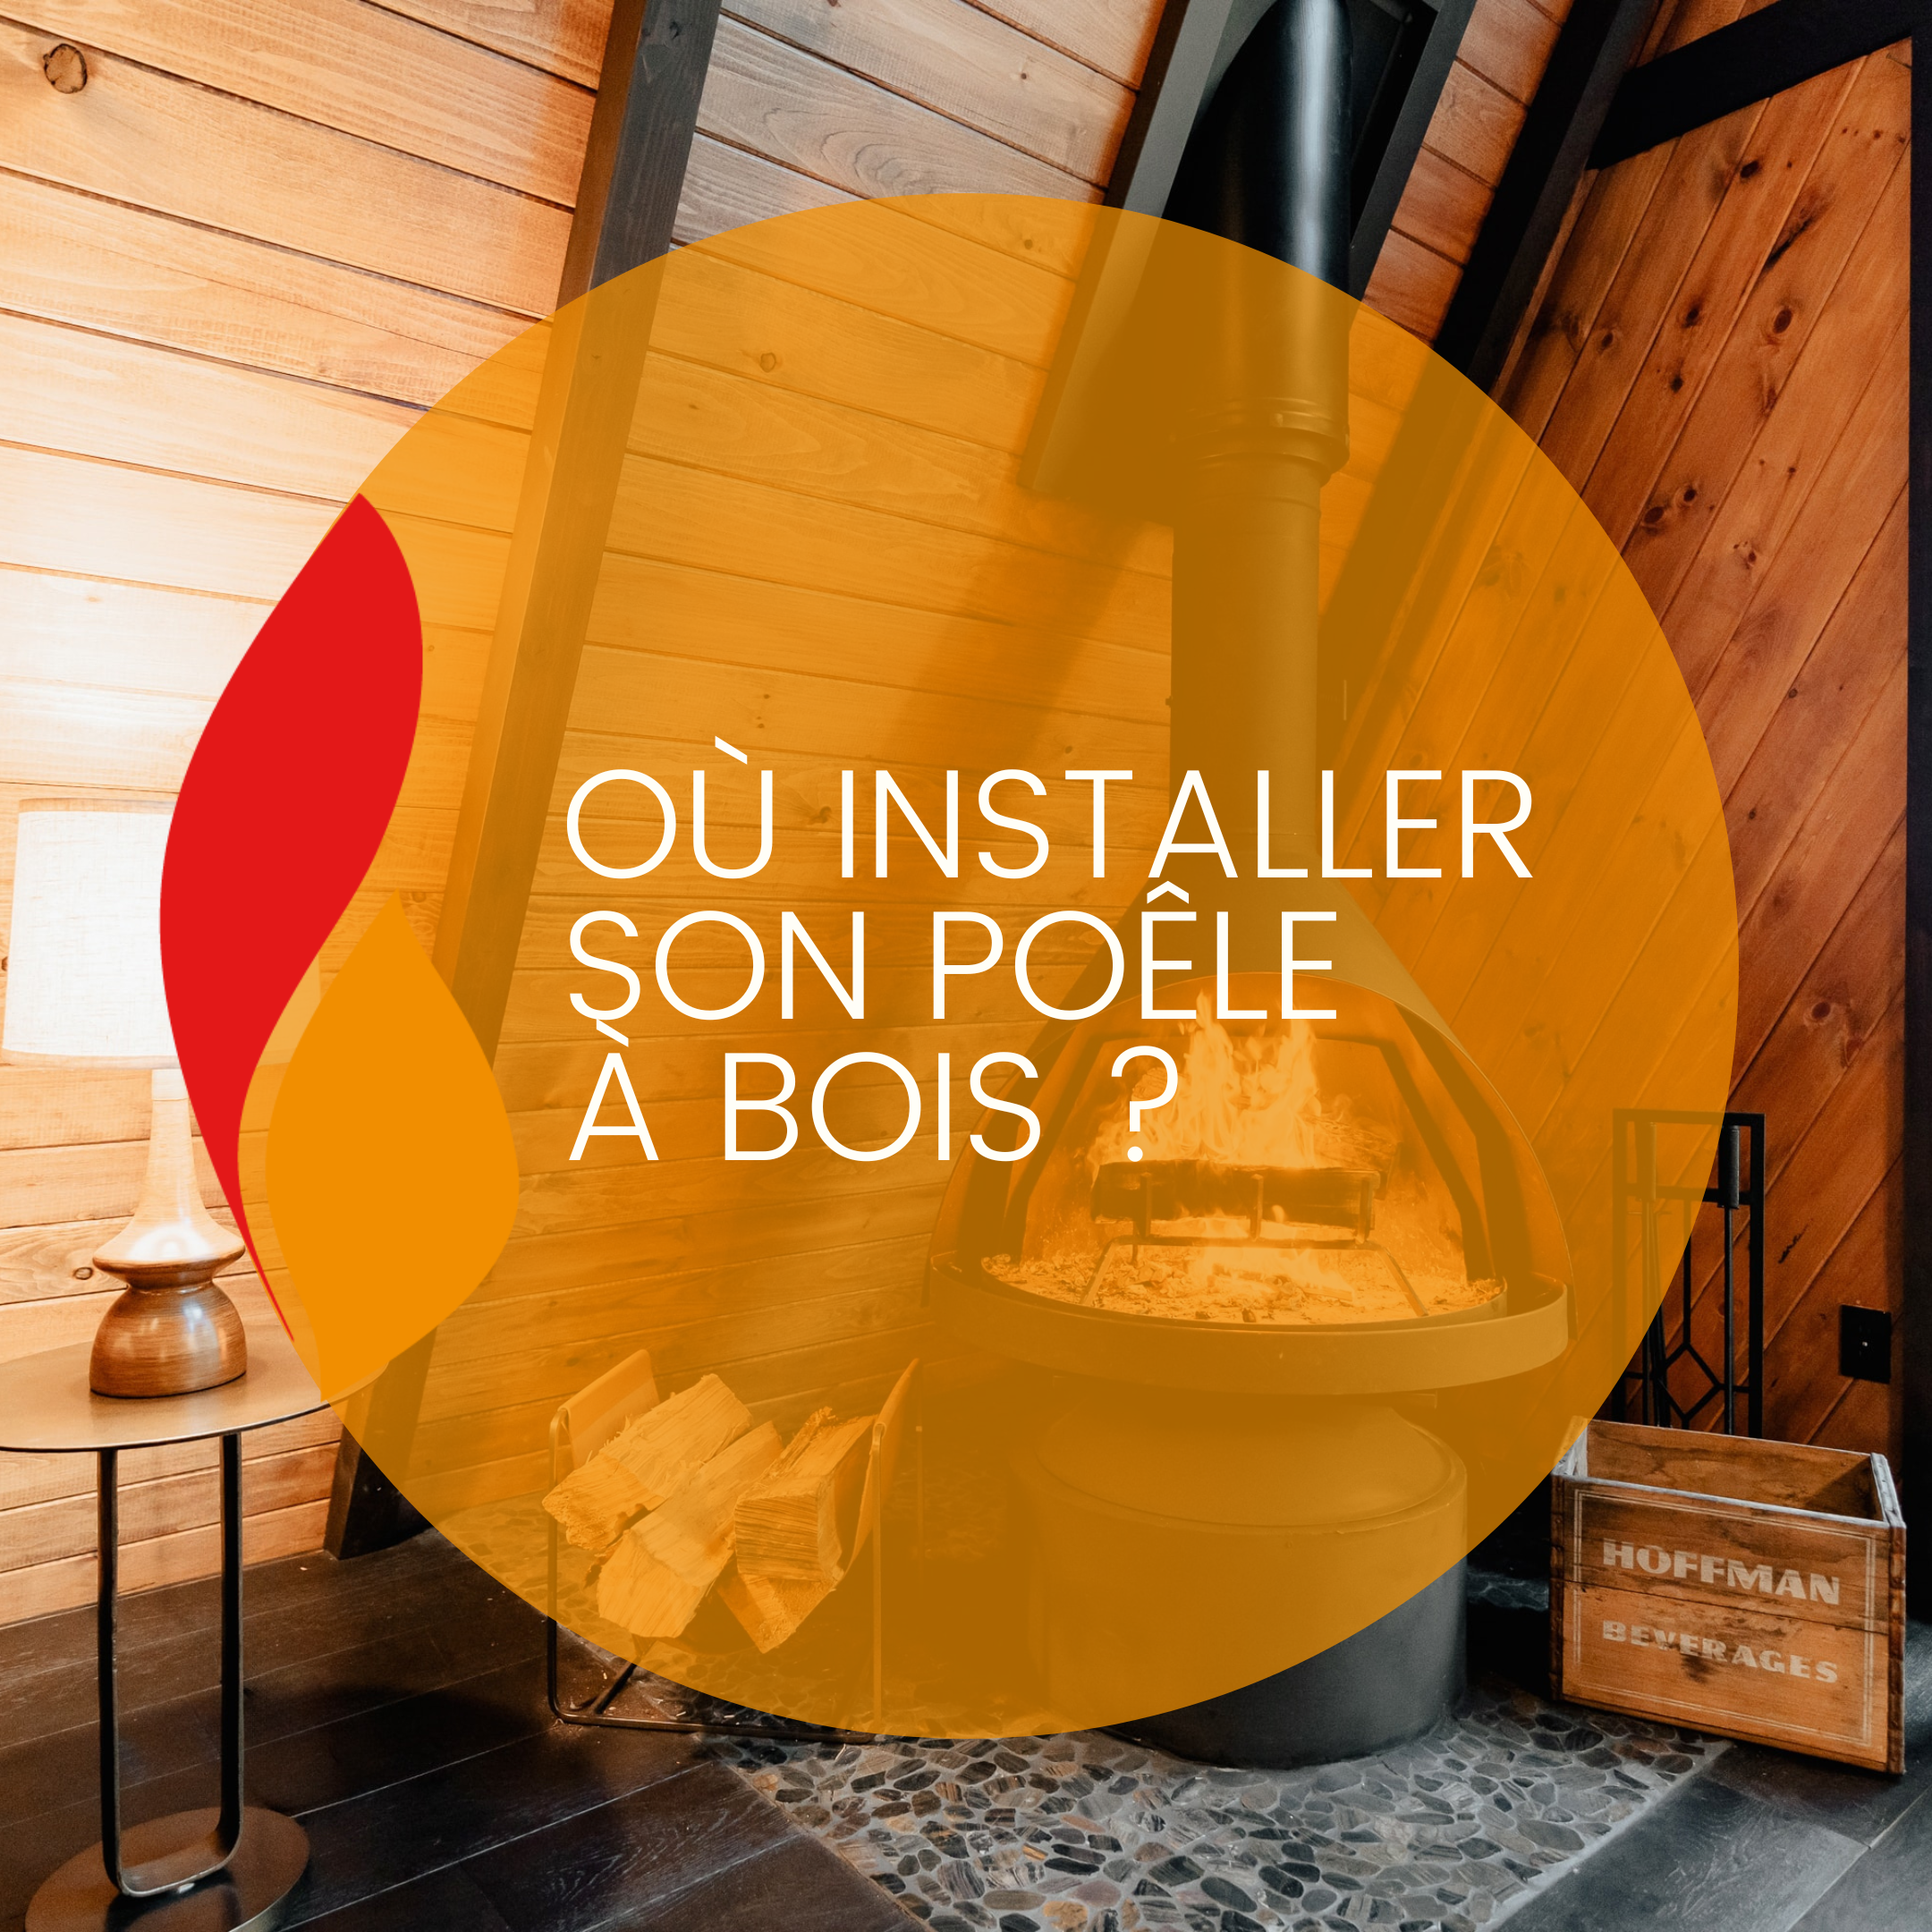 You are currently viewing Où installer son poêle à bois ?